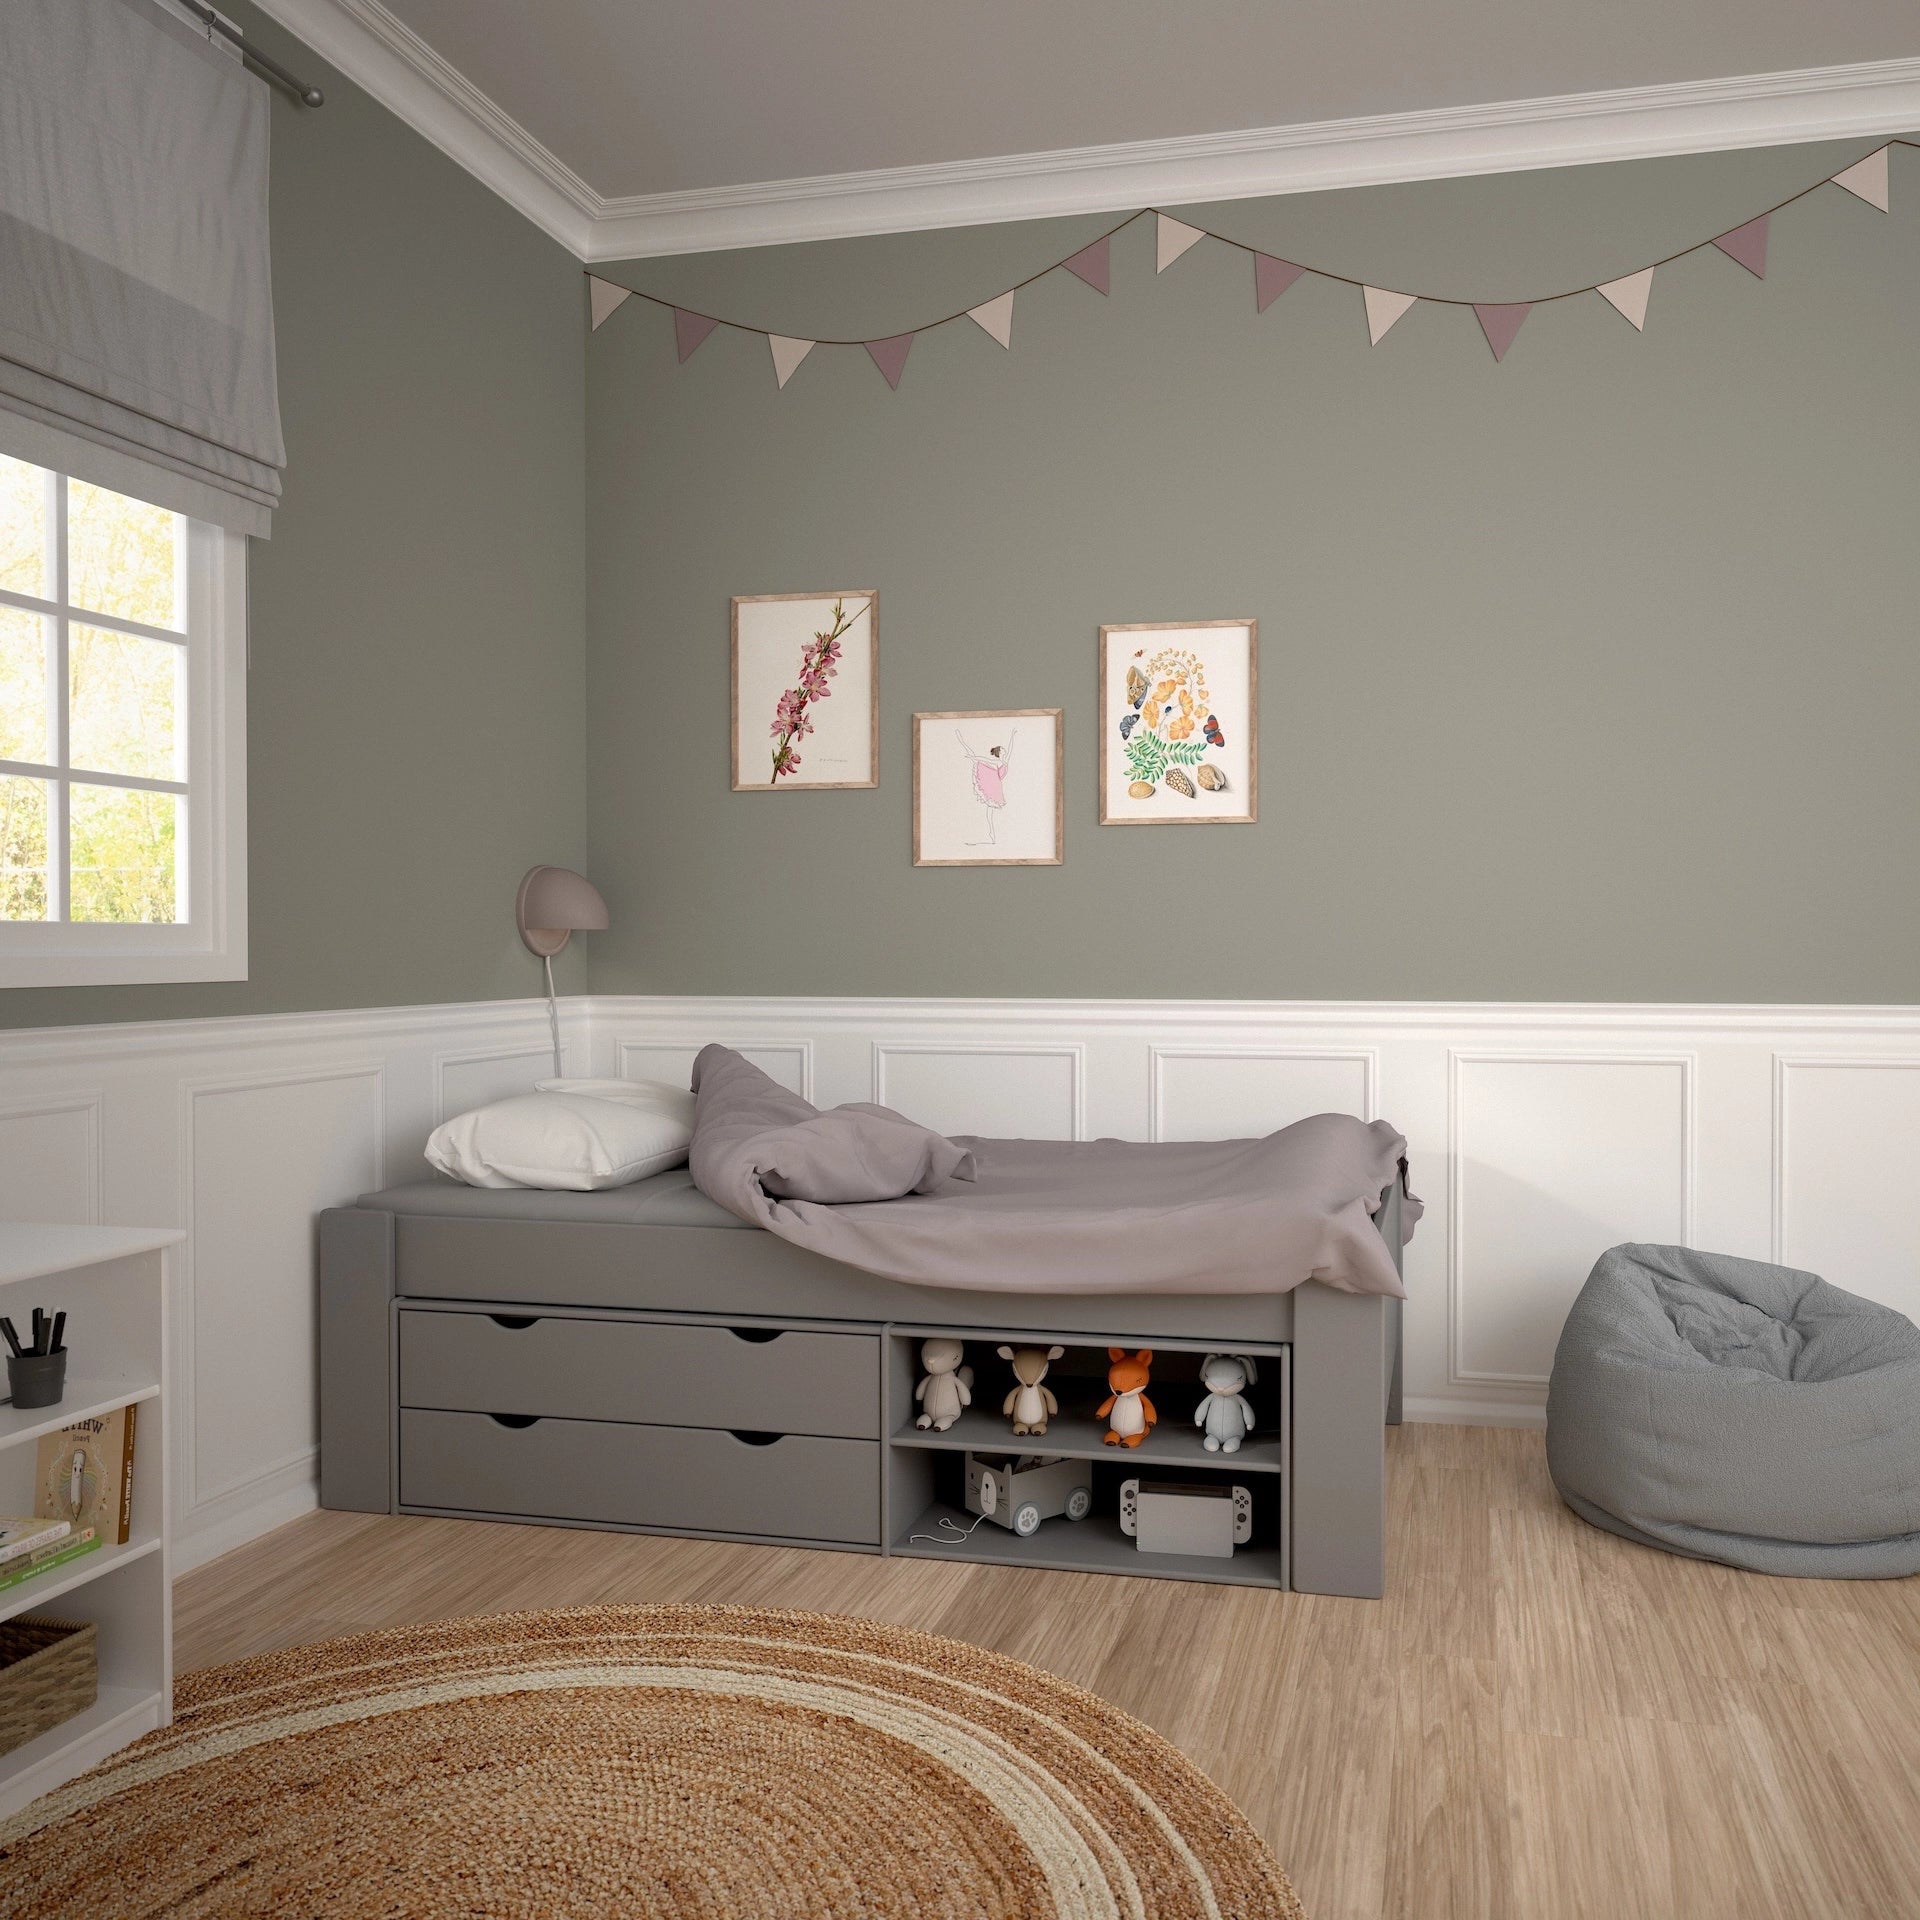 Furniture To Go Steens For Kids 3ft Single Bed, Includes - Under Bed Drawer Section 2 Drawers in Folkestone Grey